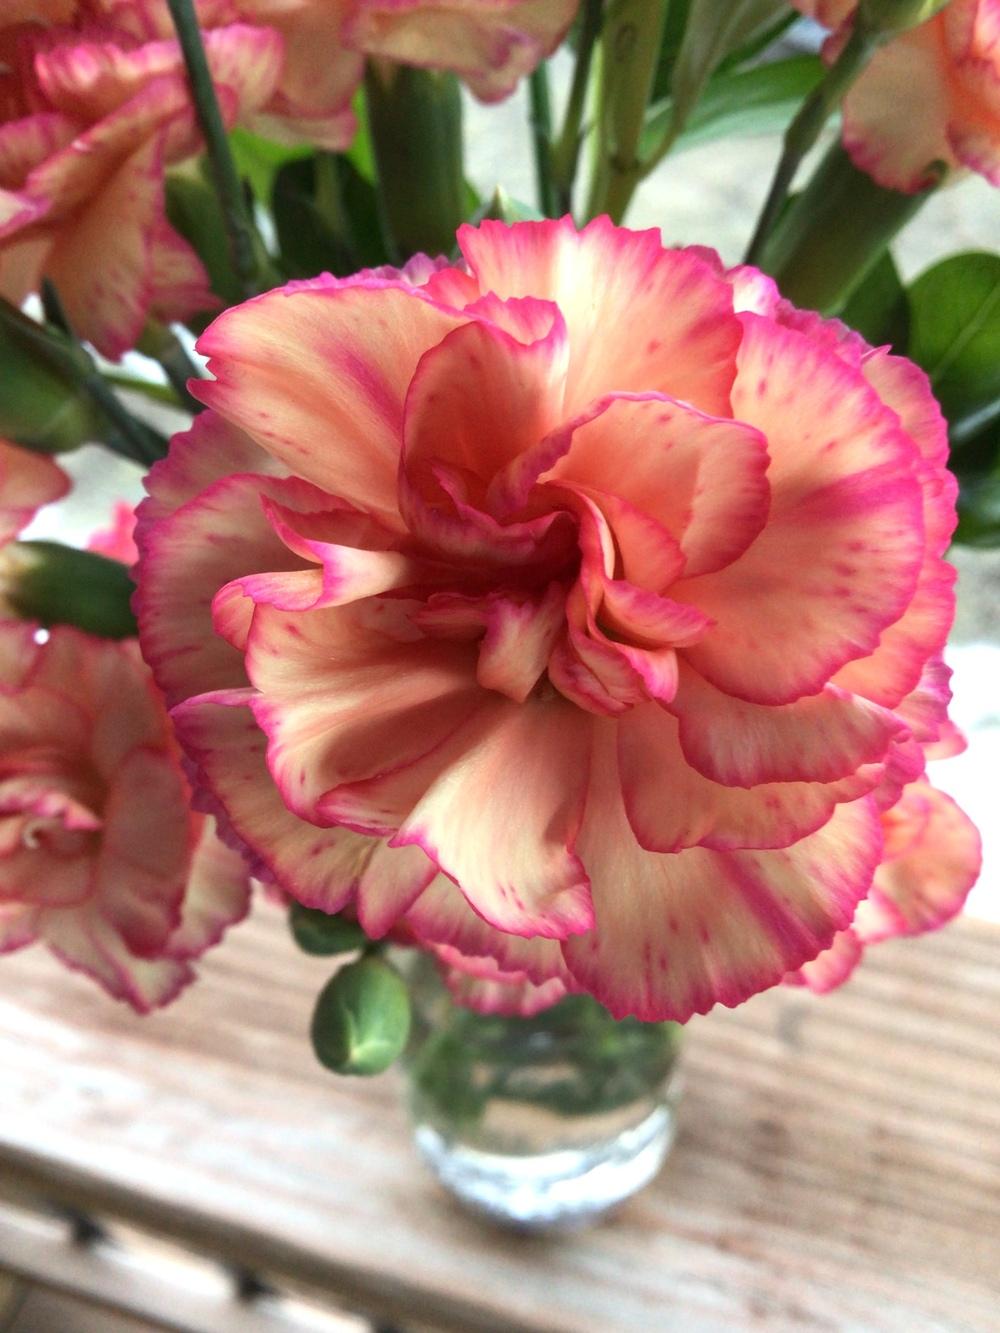 Photo of Dianthus uploaded by Fieldsof_flowers